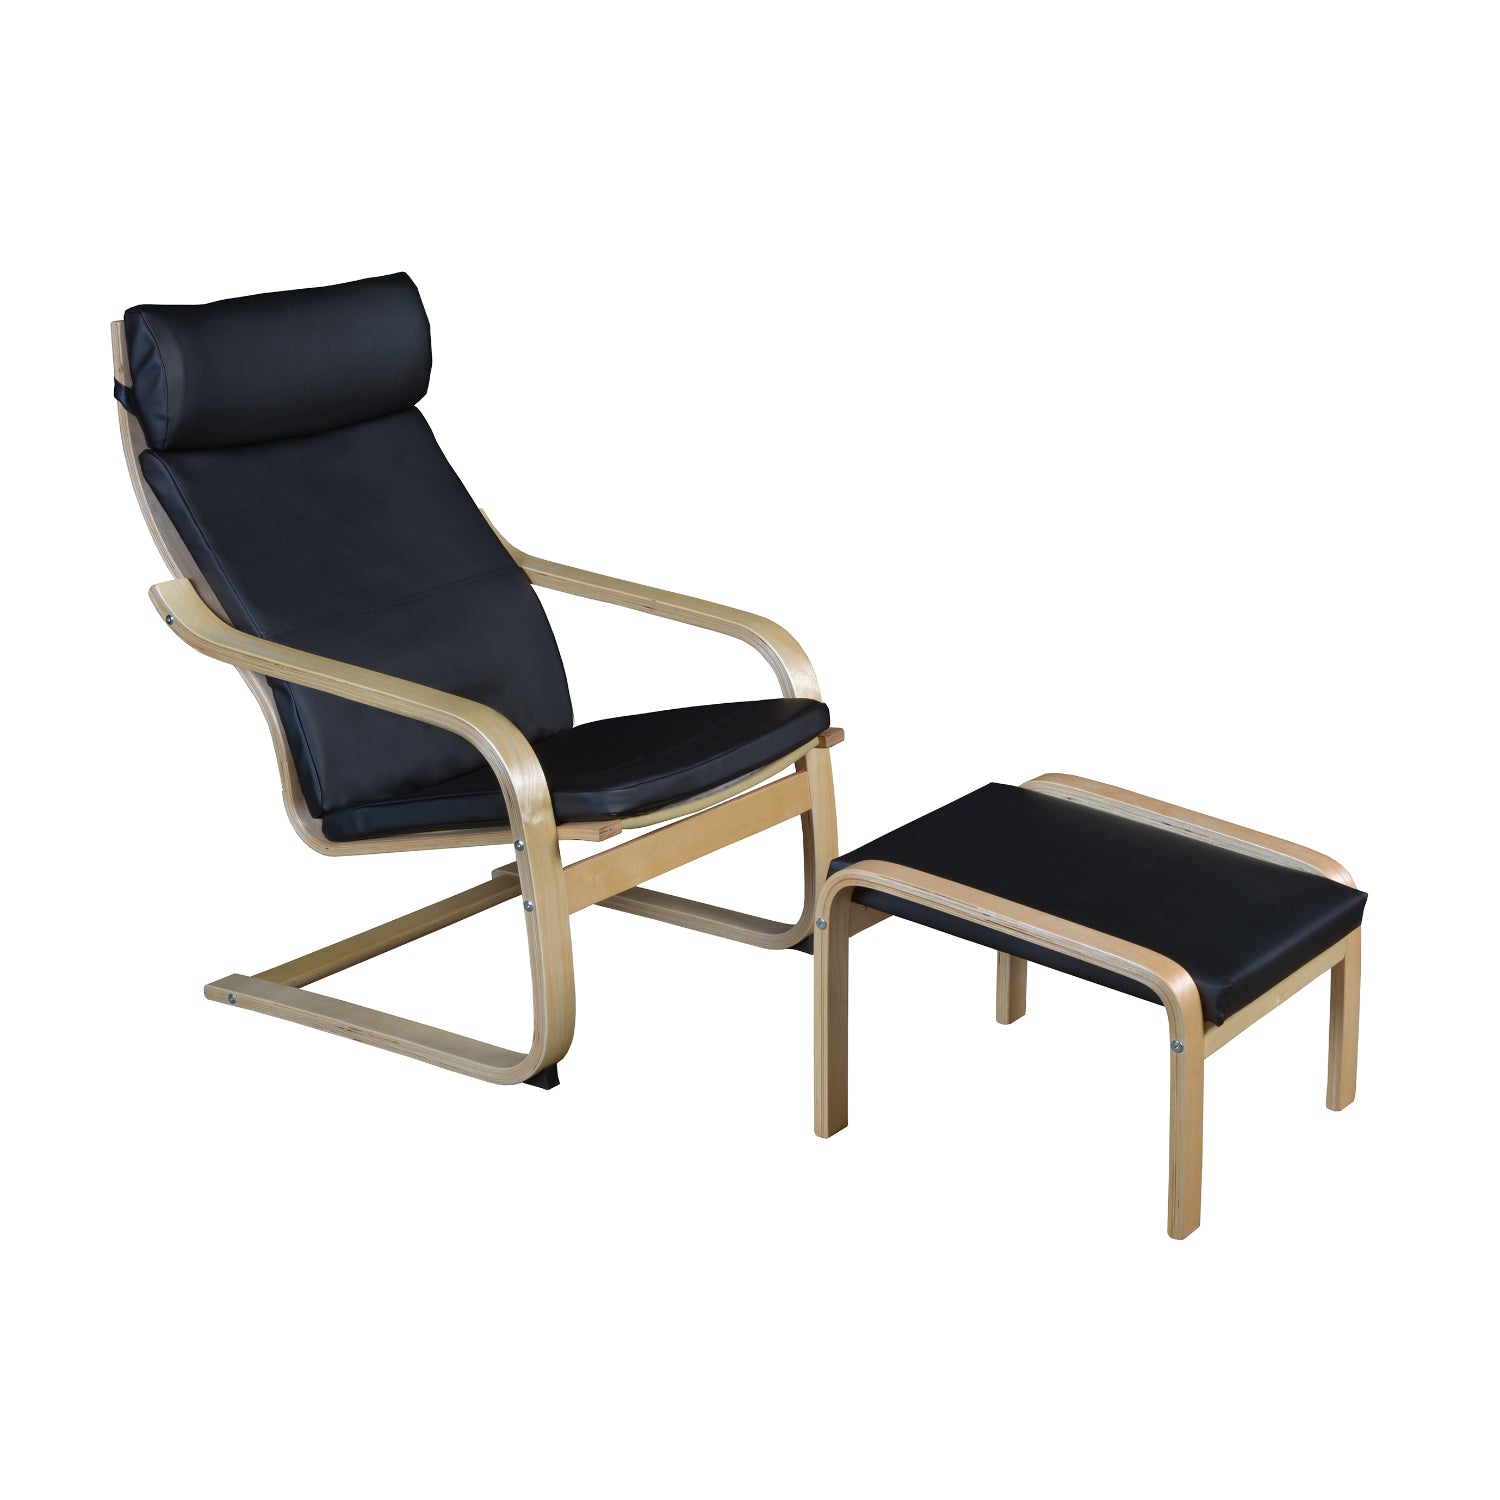 Niche Mia Bentwood Reclining Chair and Ottoman, Natural Frame Finish, Black Leather Upholstery